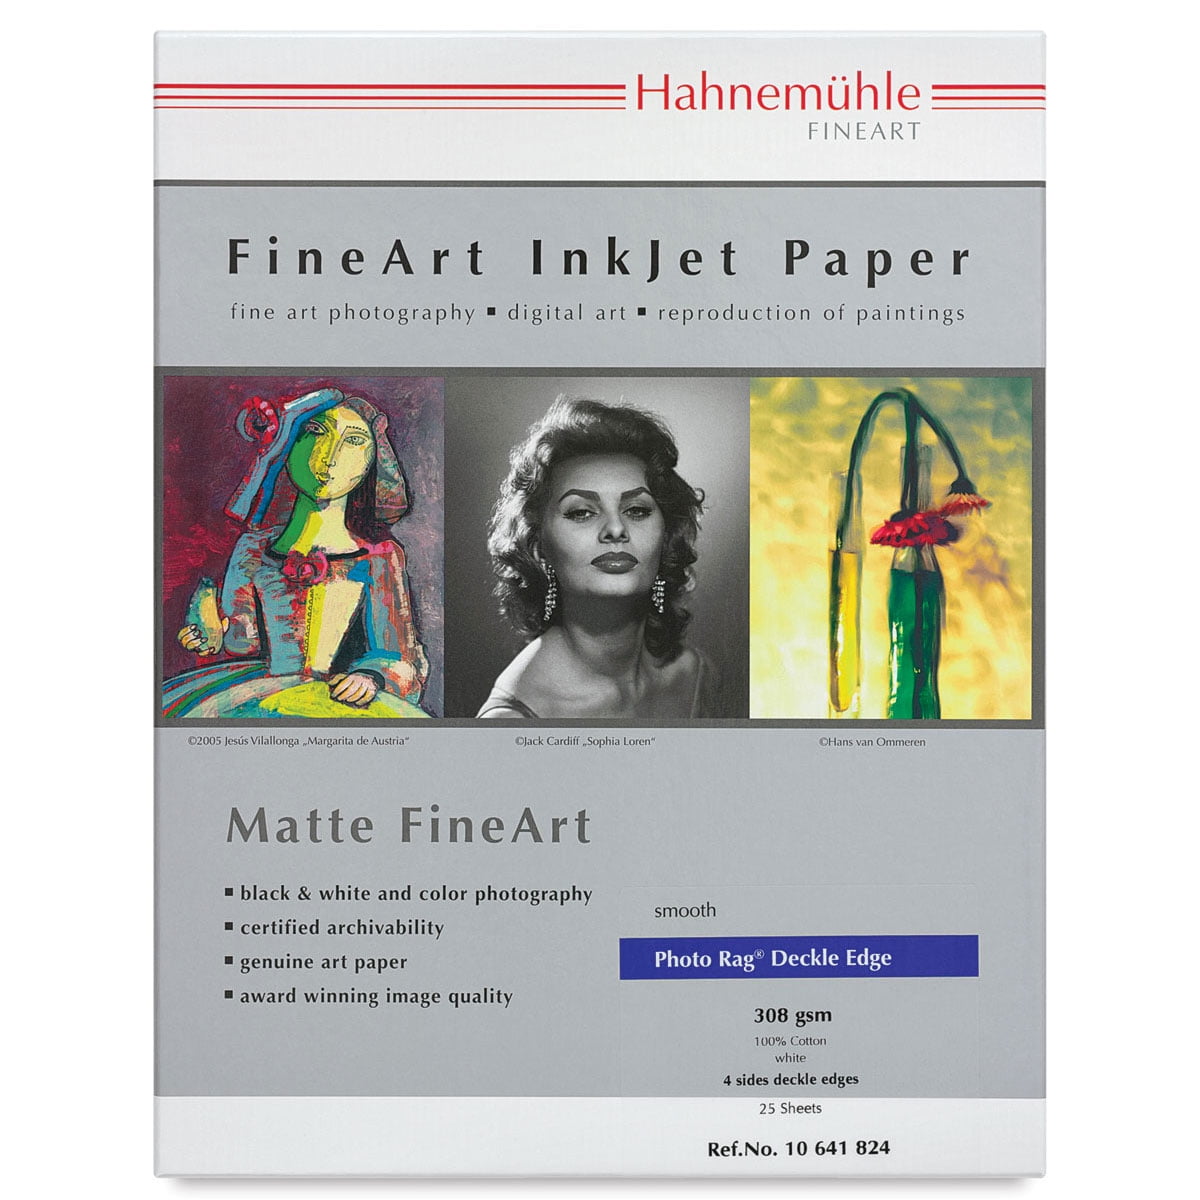 Hahnemuhle Smooth Fine Art Paper 13X19  375 Sheets HP Q8728A Lot of 3 5 Packs 